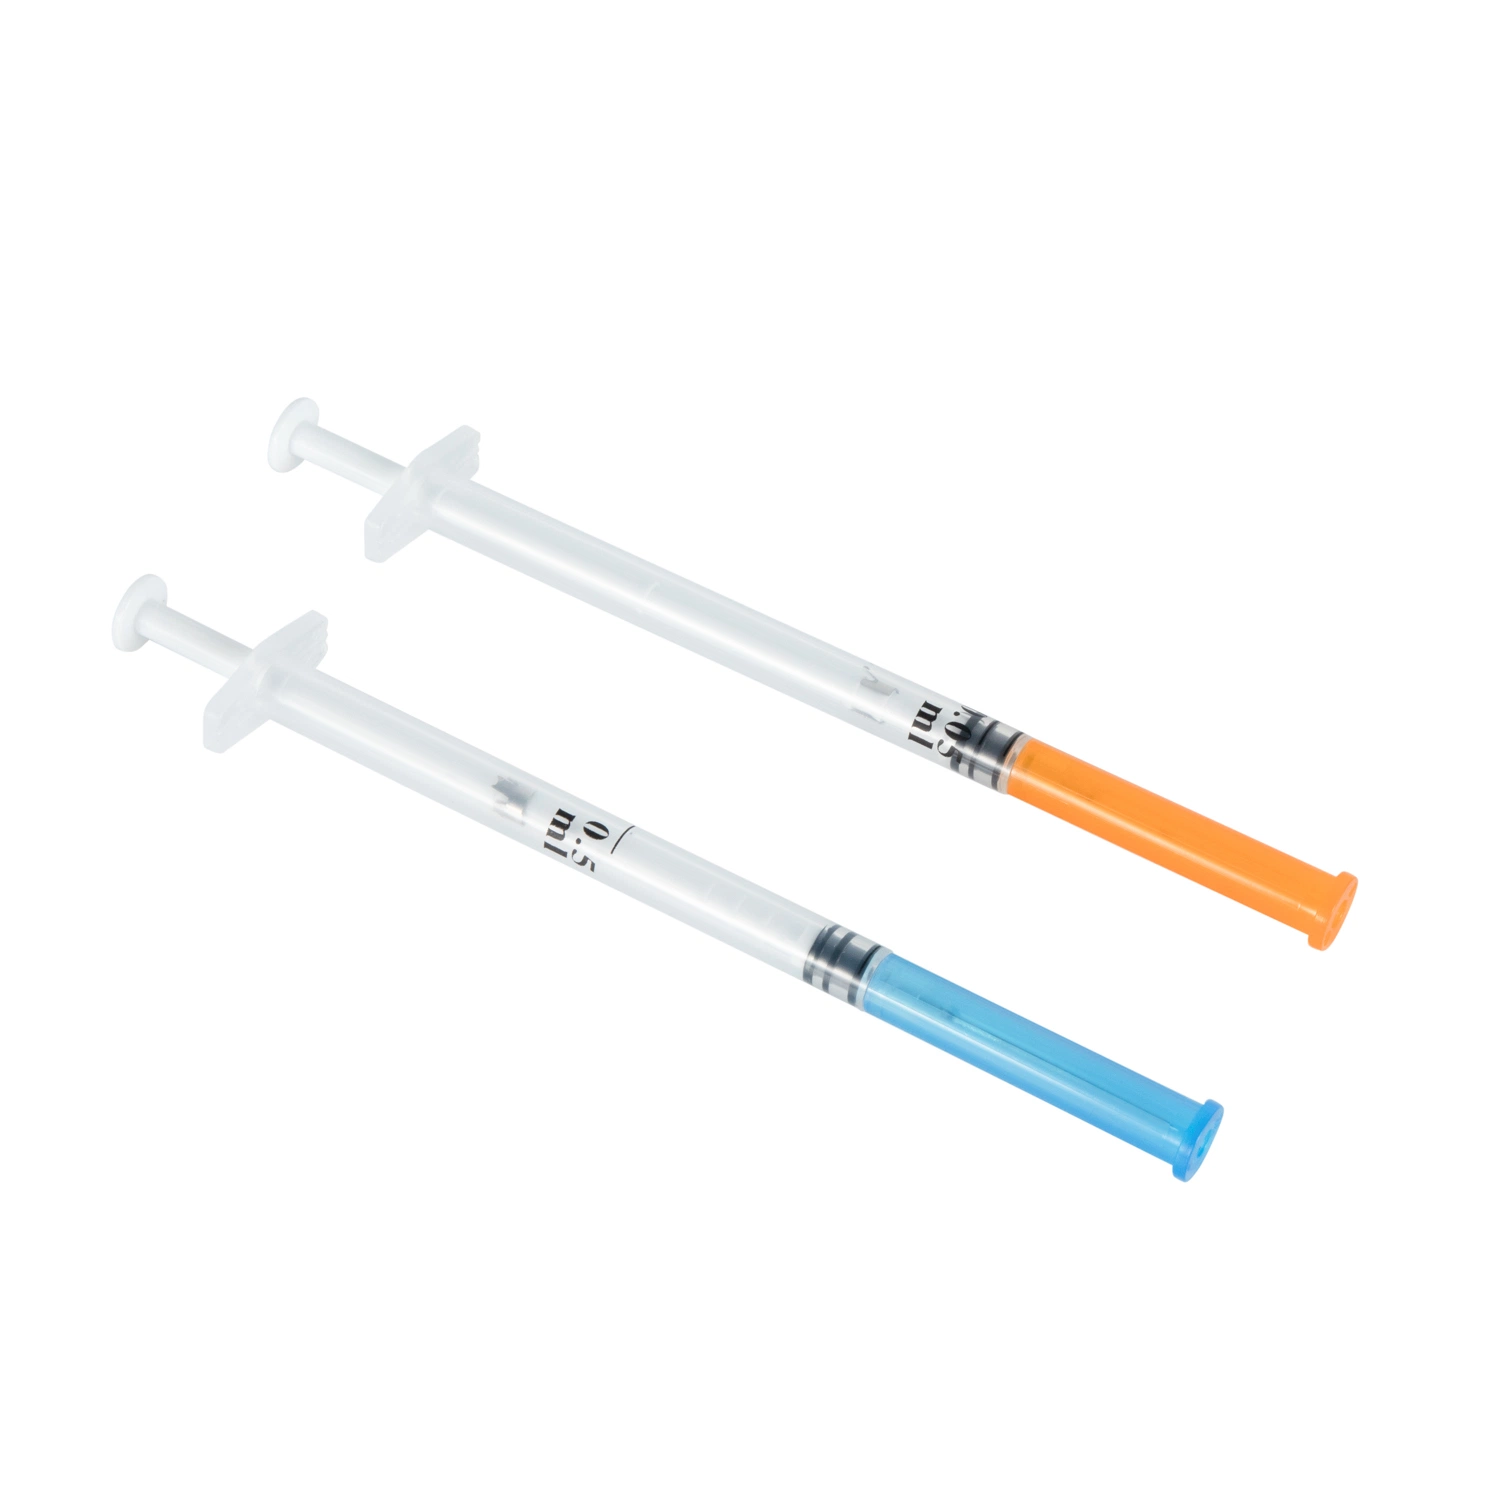 Hospital Instruments Disposable Medical Device with Fixed Needles Lds Self-Destroy Fixed Dose Vaccine Syringe